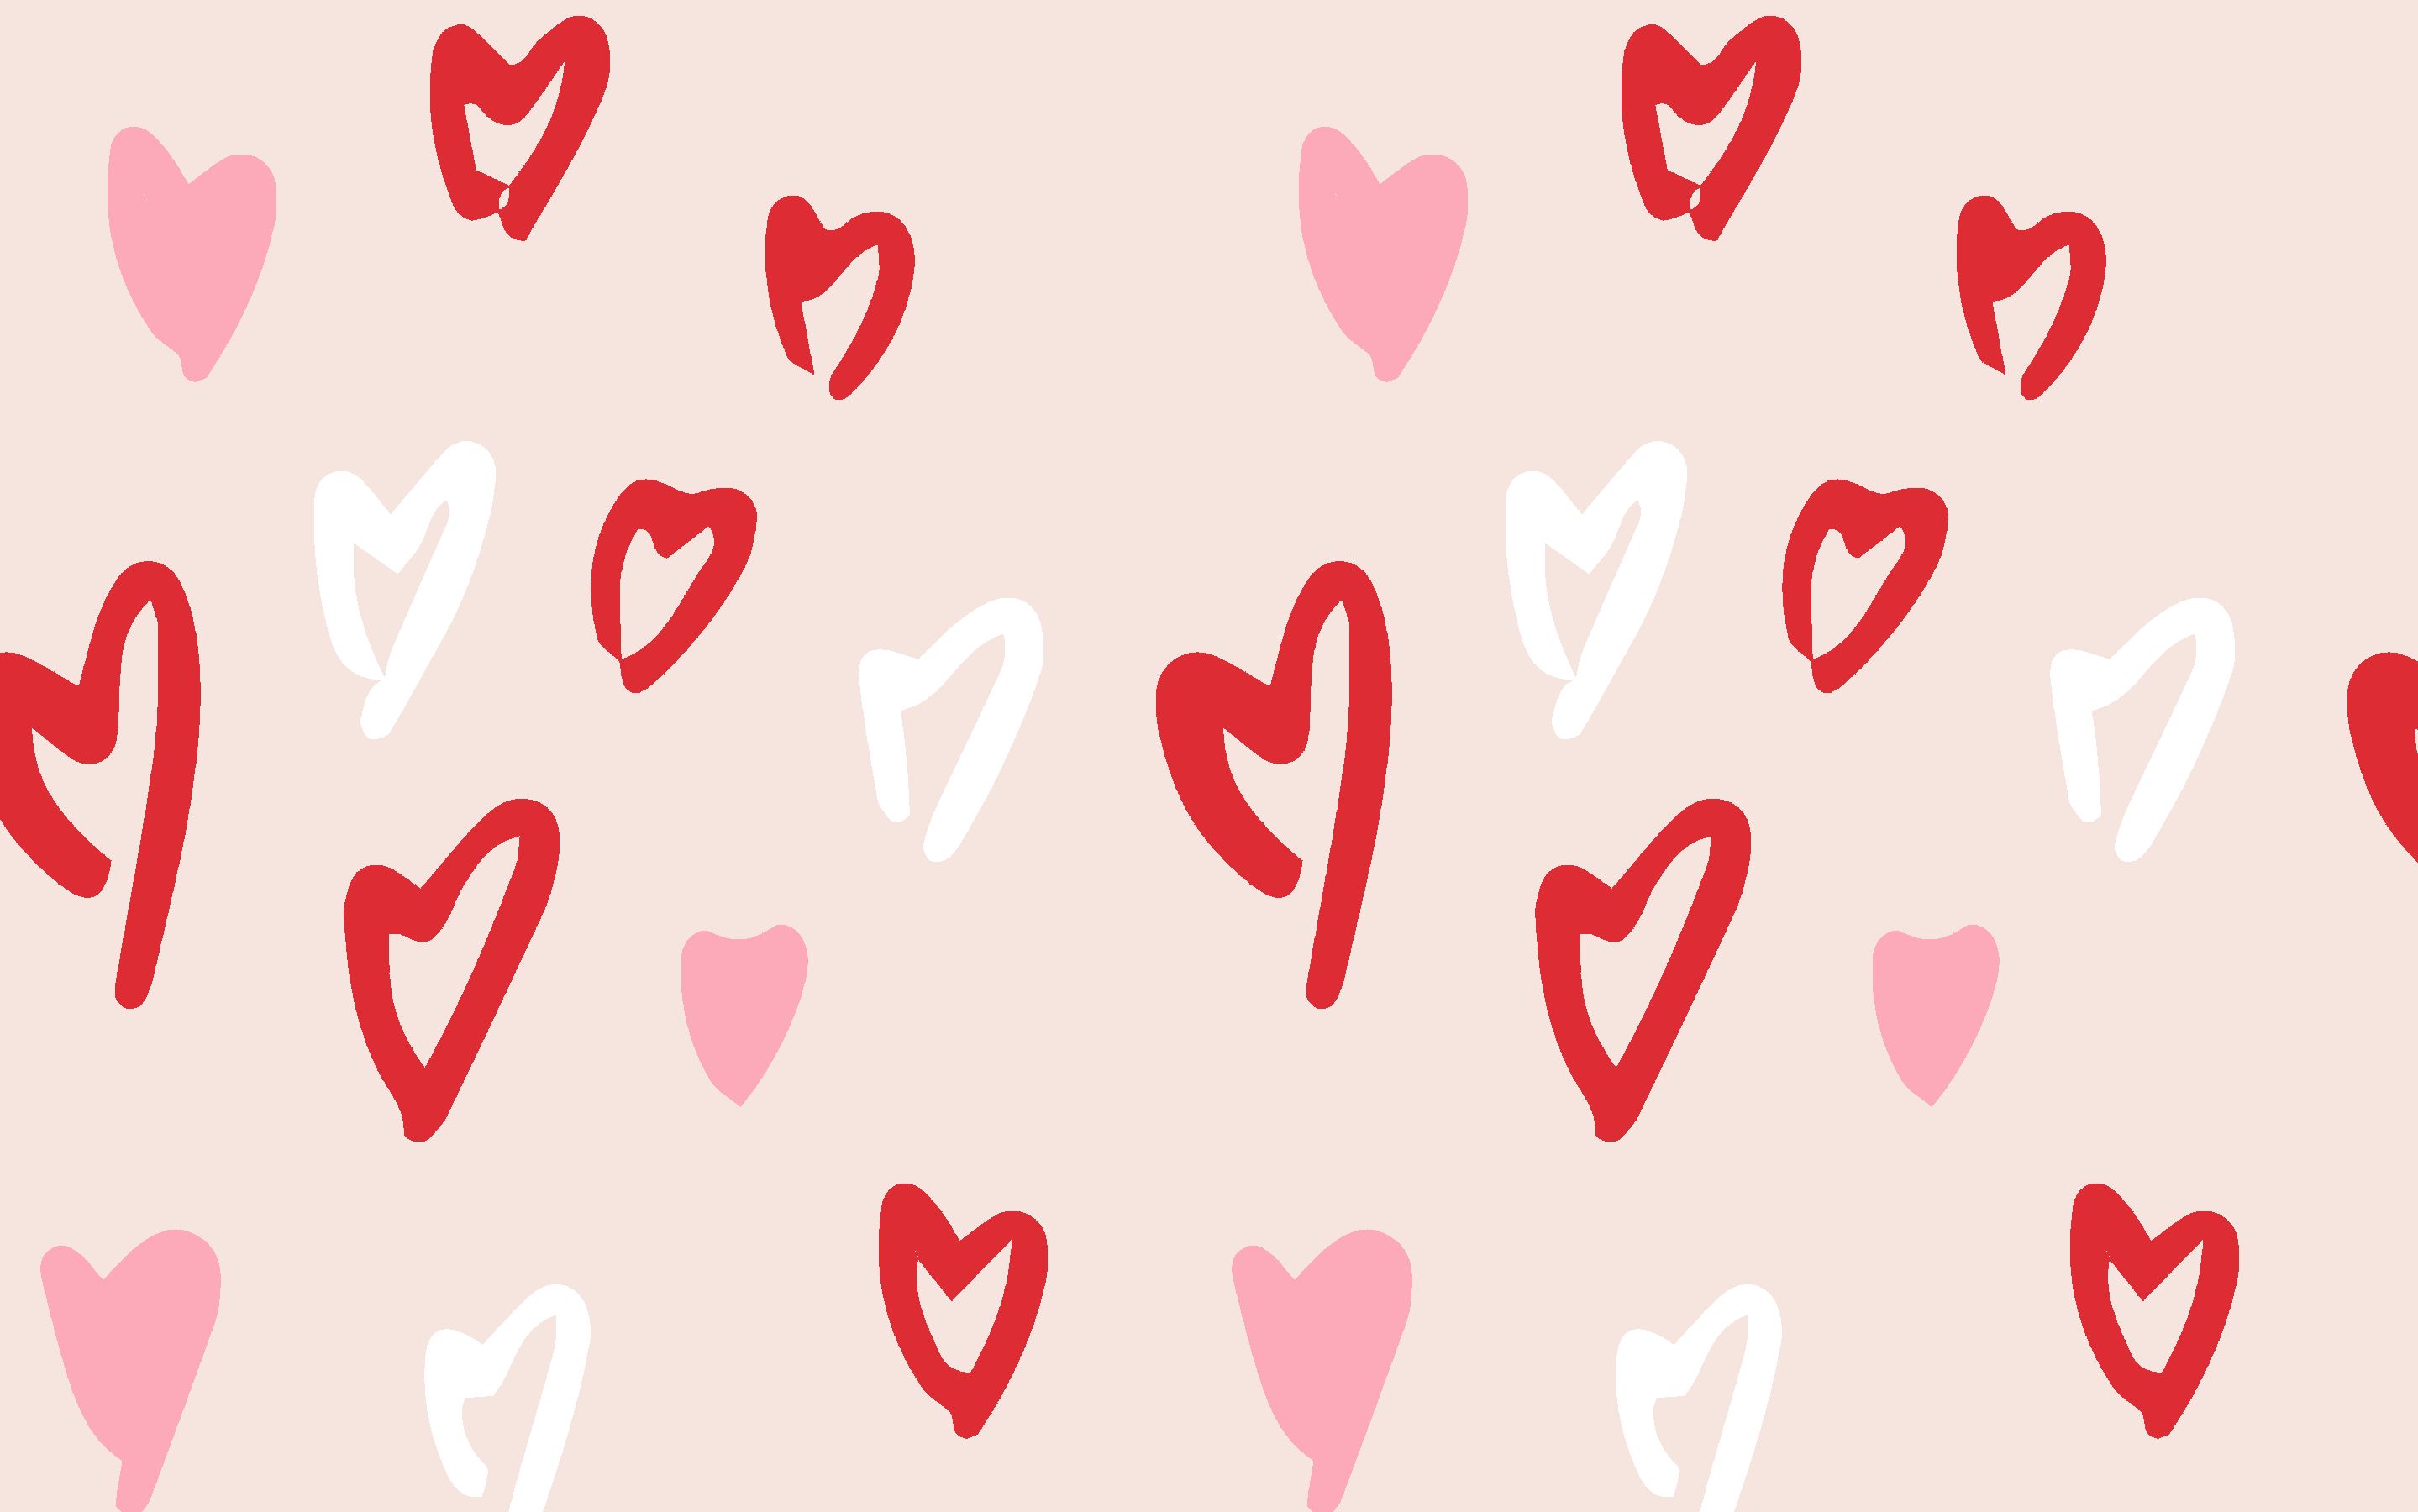 Valentine background Images  Search Images on Everypixel